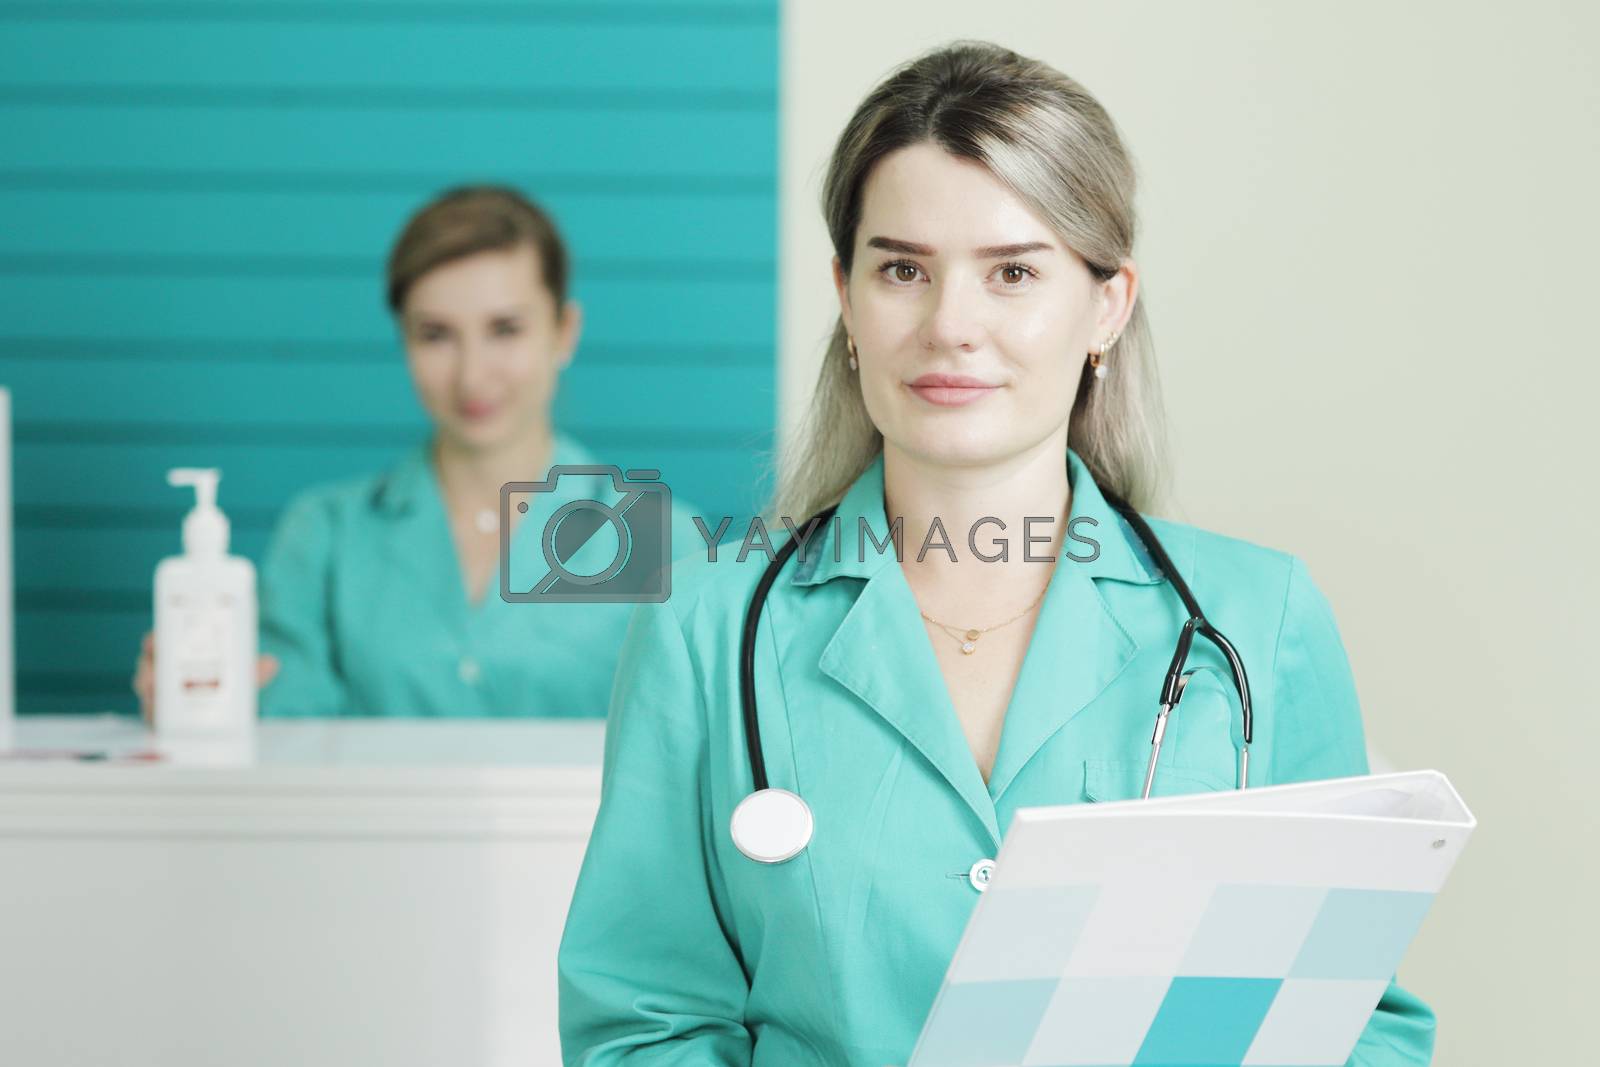 Royalty free image of Two female doctors or nurses looking at the camera. Stethoscope on the neck by selinsmo